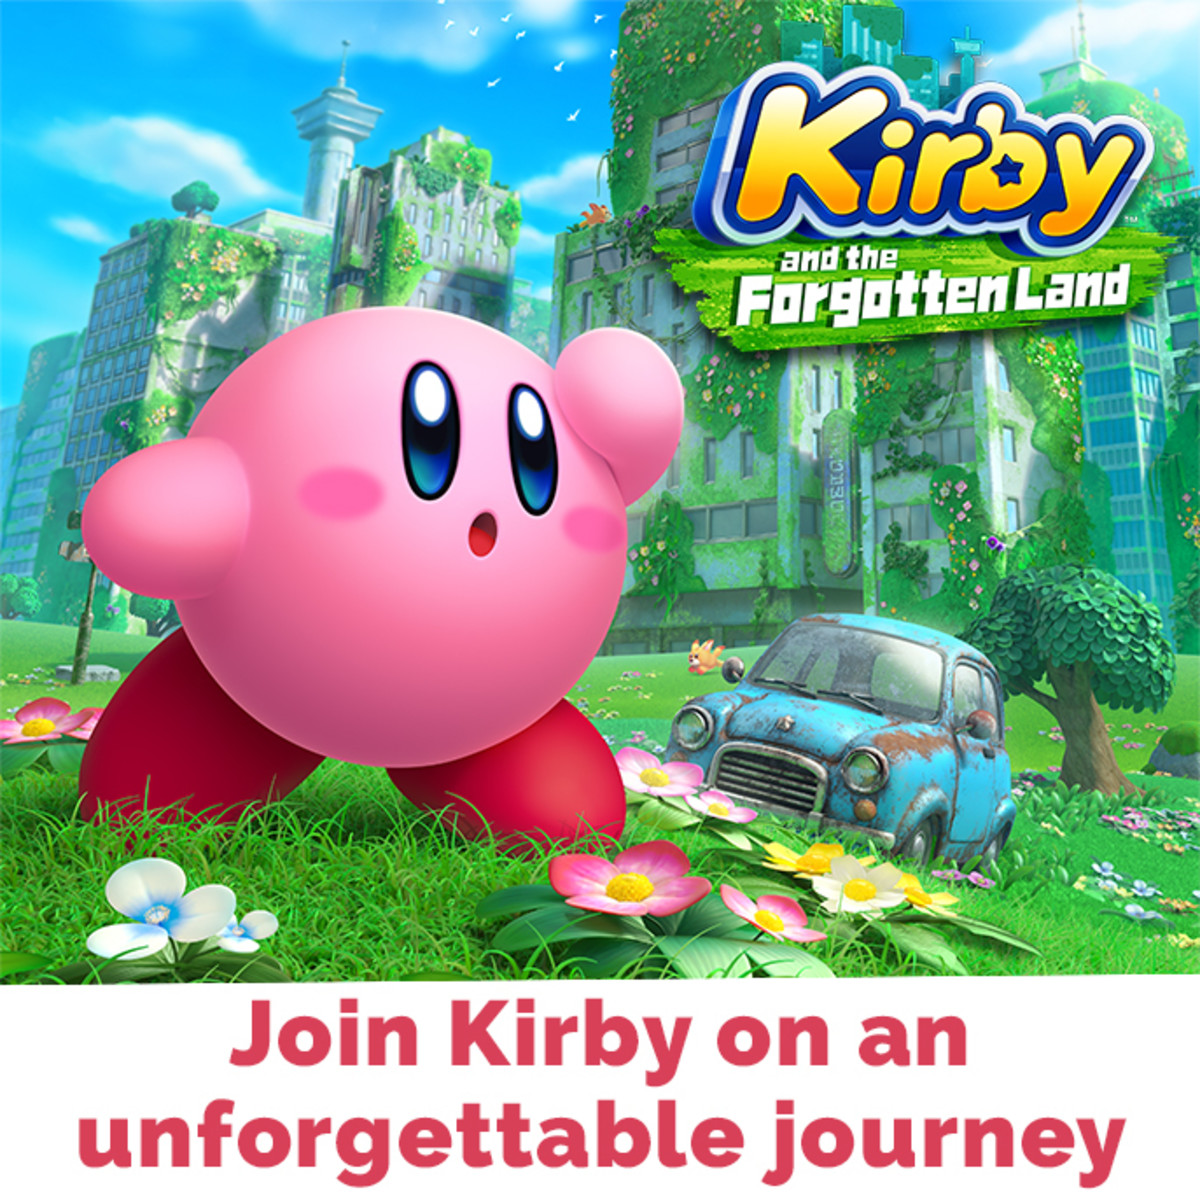 Kirby and the Forgotten